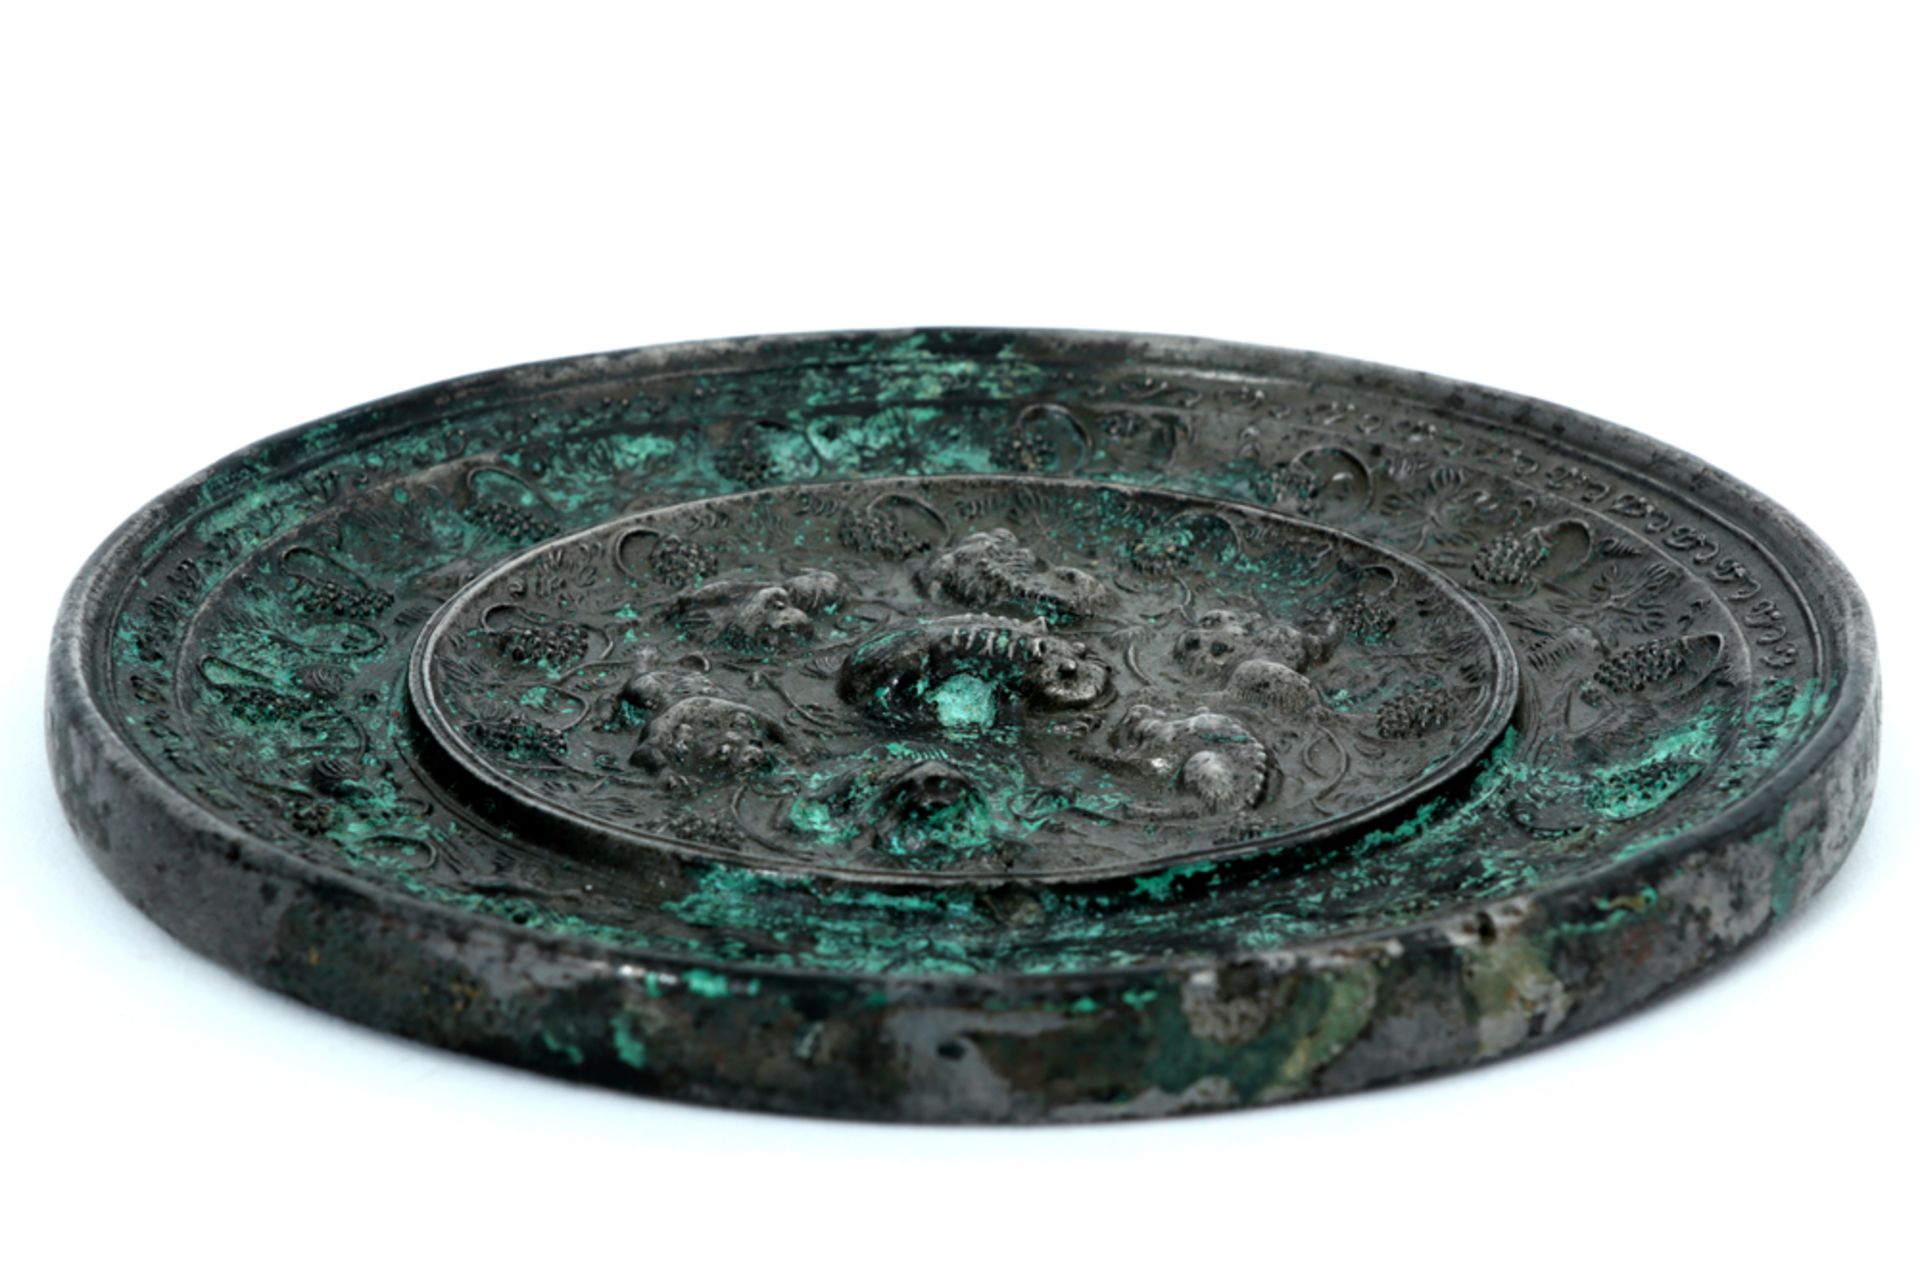 Chinese Tang Dynasty bronze mirror with the depictions of grapevines, birds and mythical - Image 3 of 3